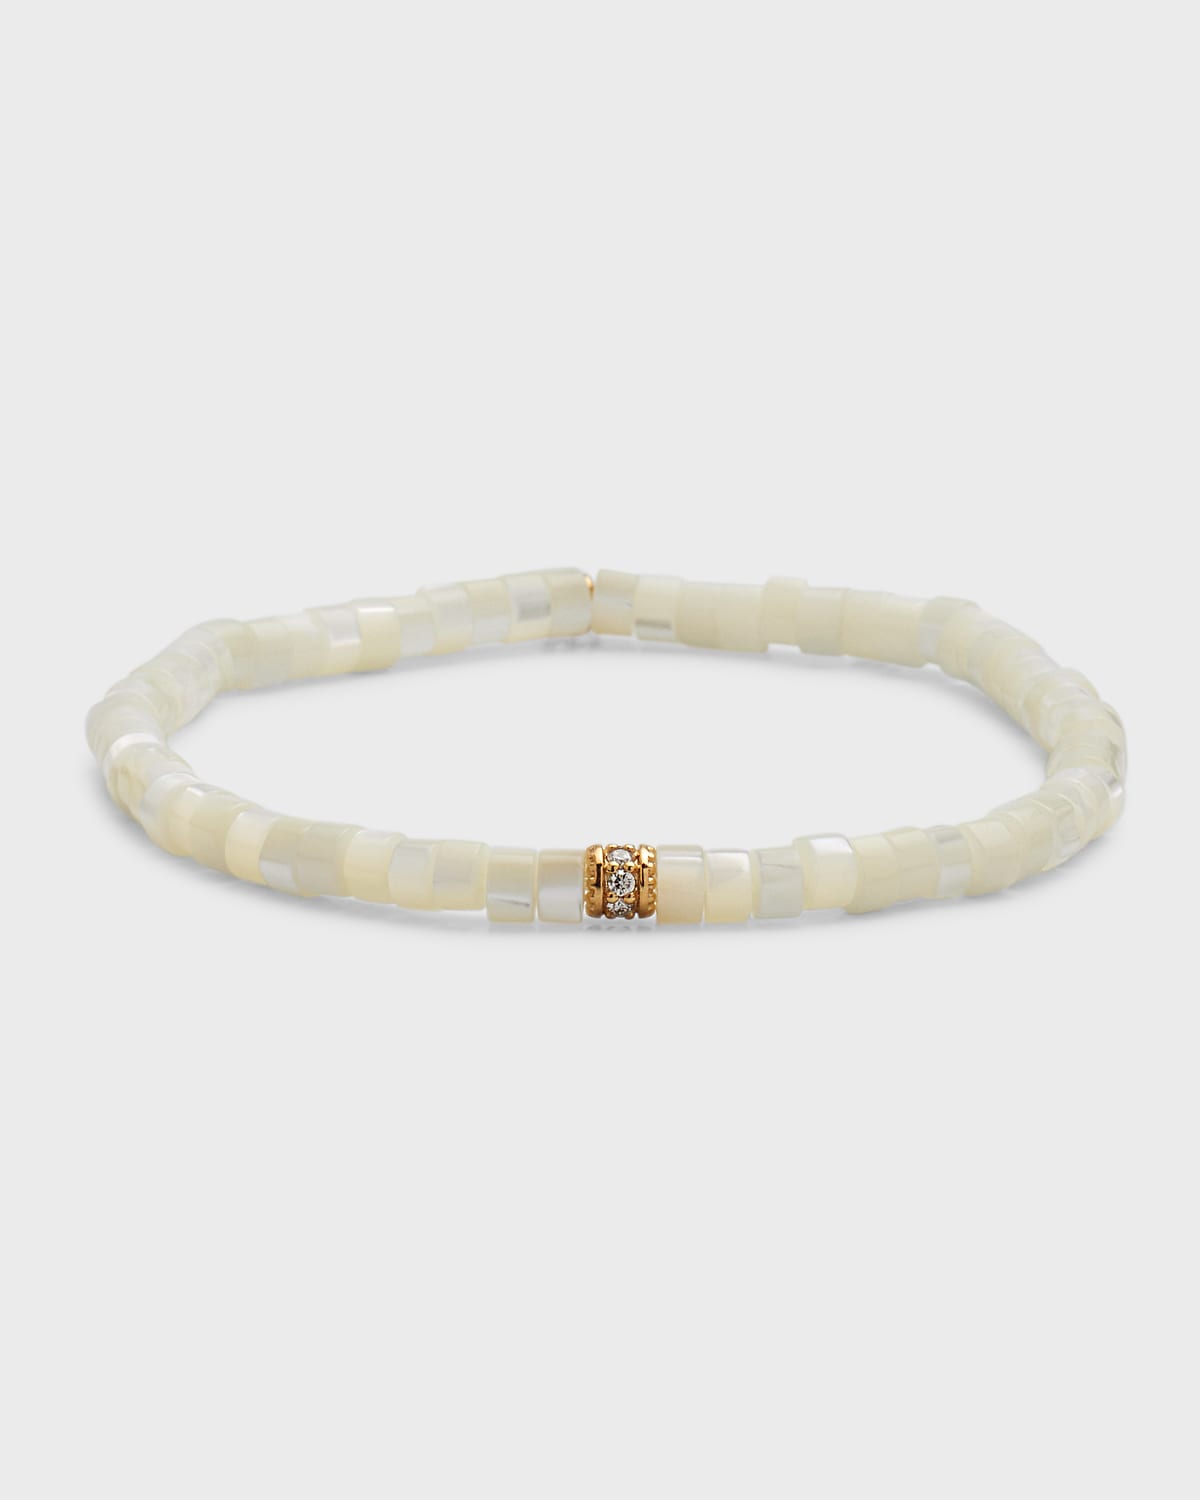 SYDNEY EVAN 14K YELLOW GOLD SCALLOP EDGE PAVE RONDELLE AND MOTHER-OF-PEARL BRACELET